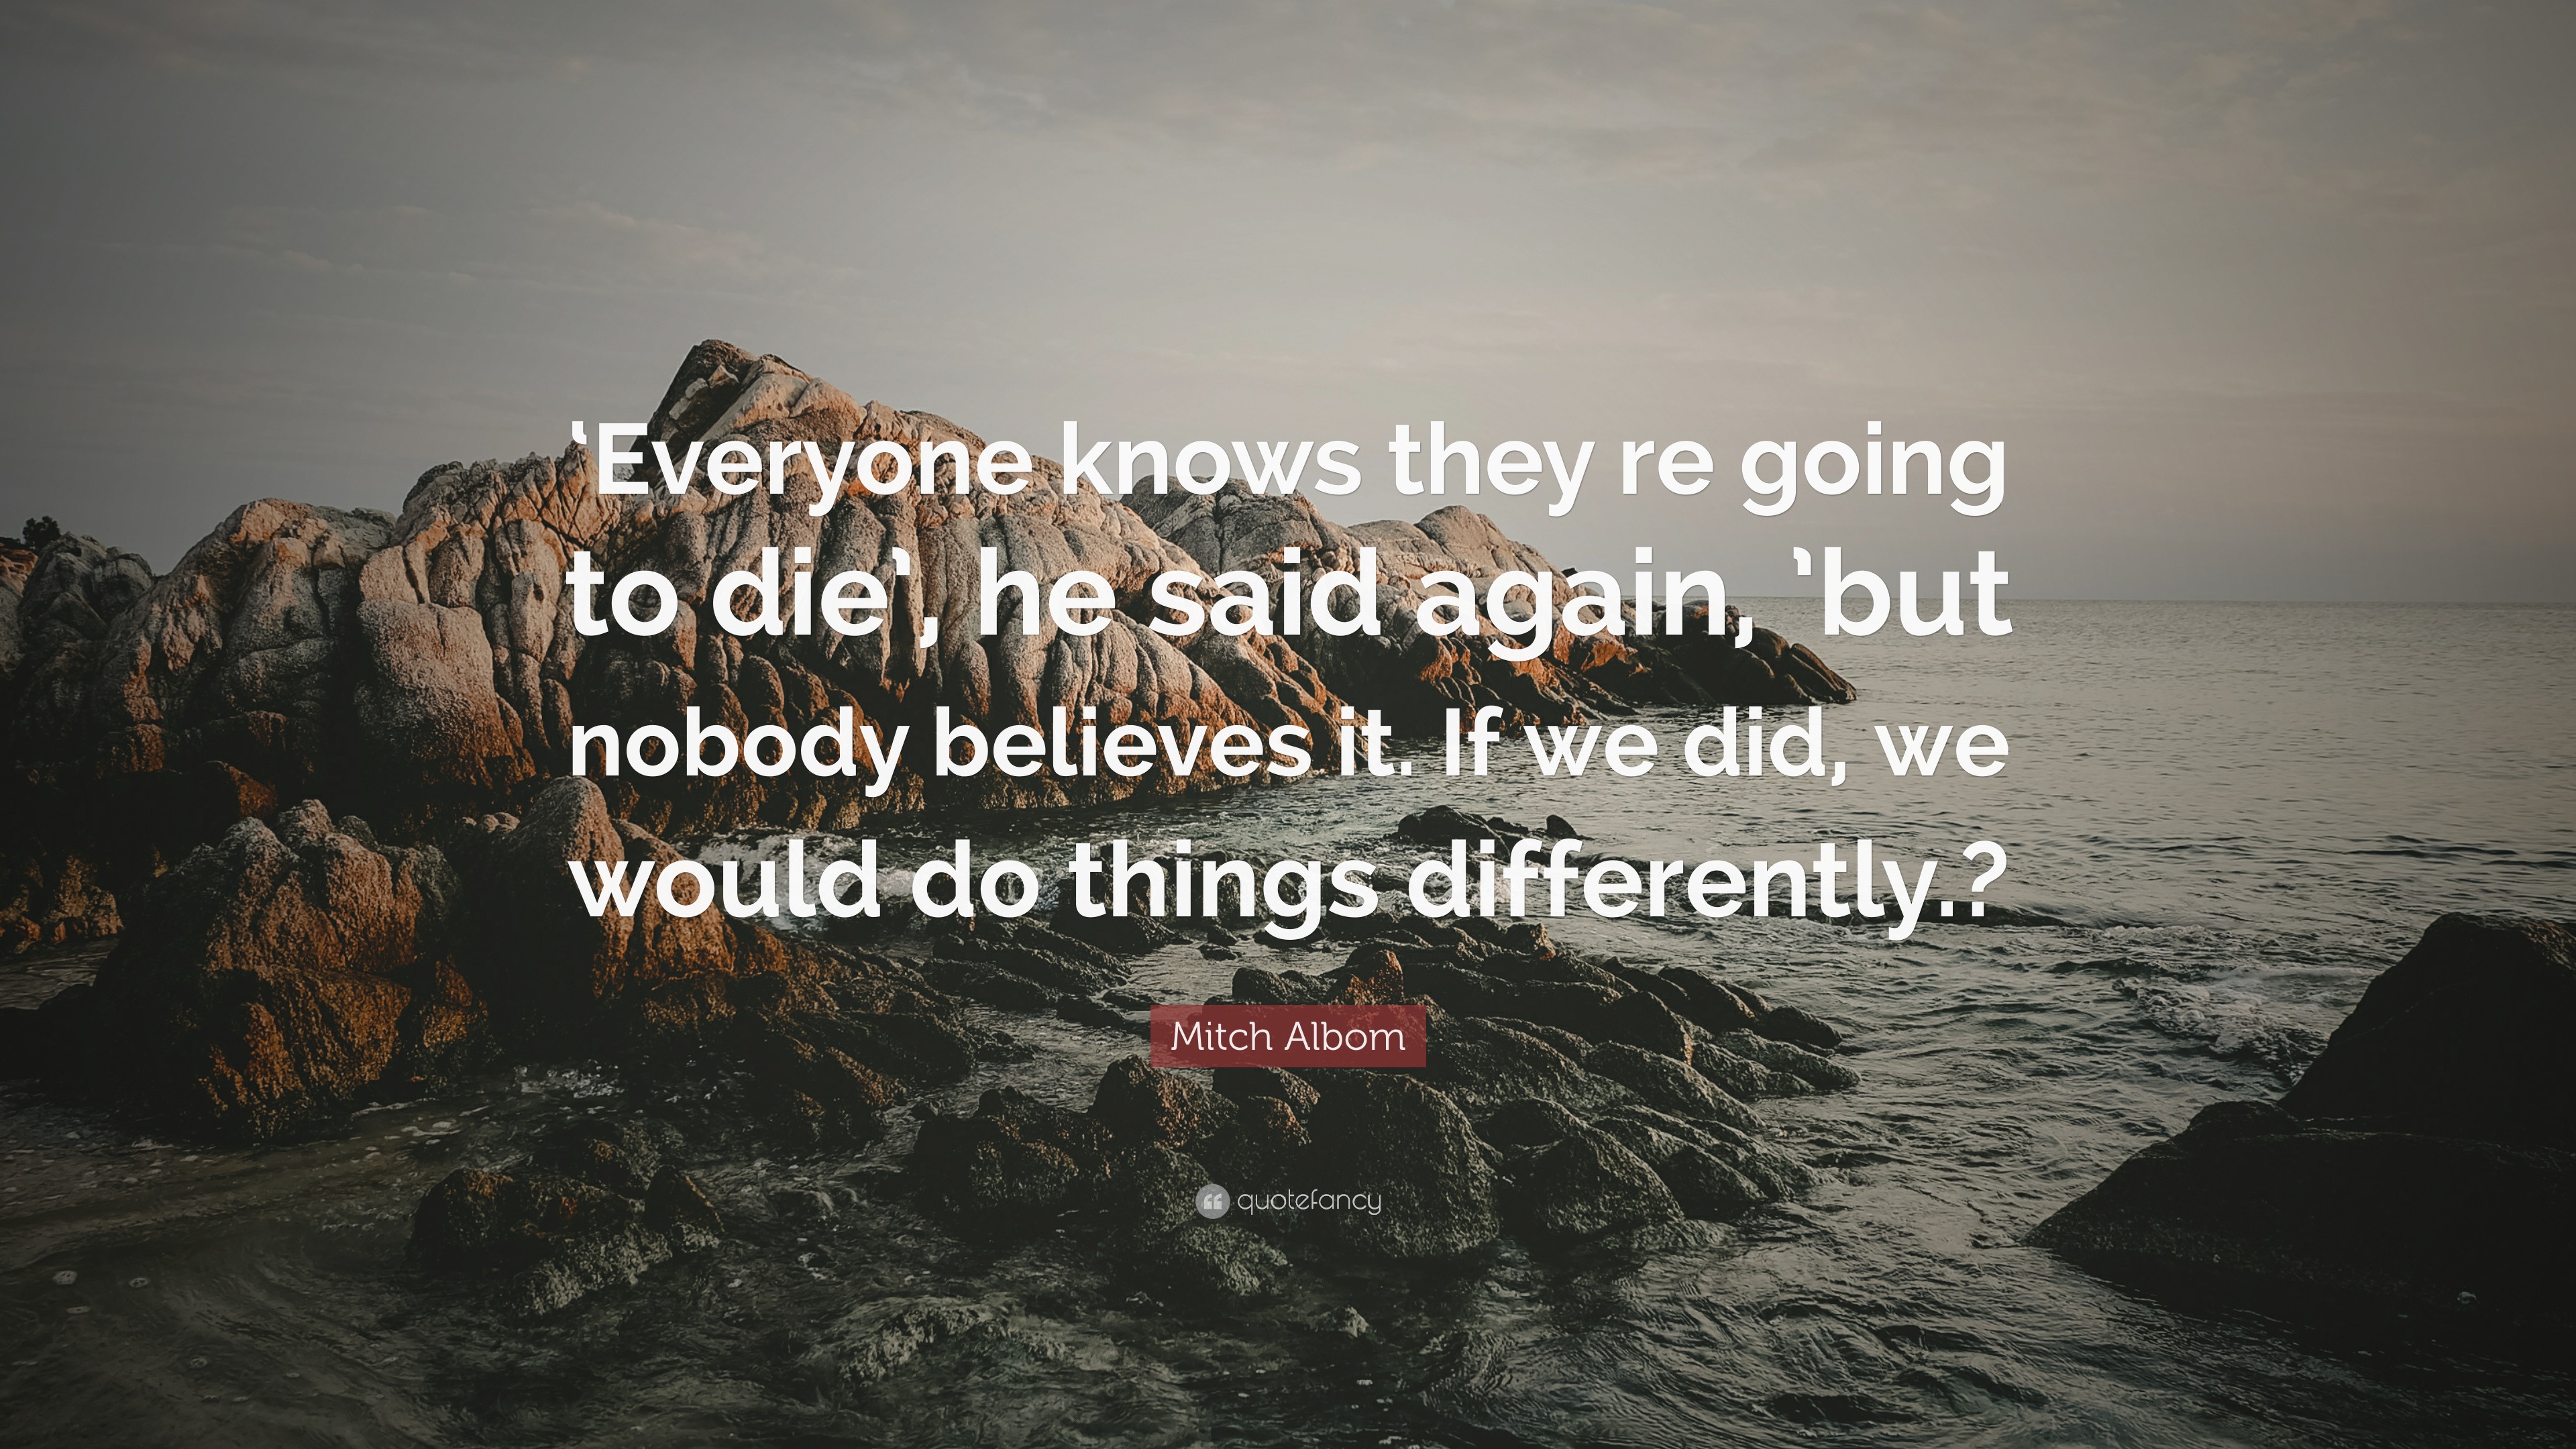 Mitch Albom Quote: “‘Everyone knows they re going to die’, he said ...